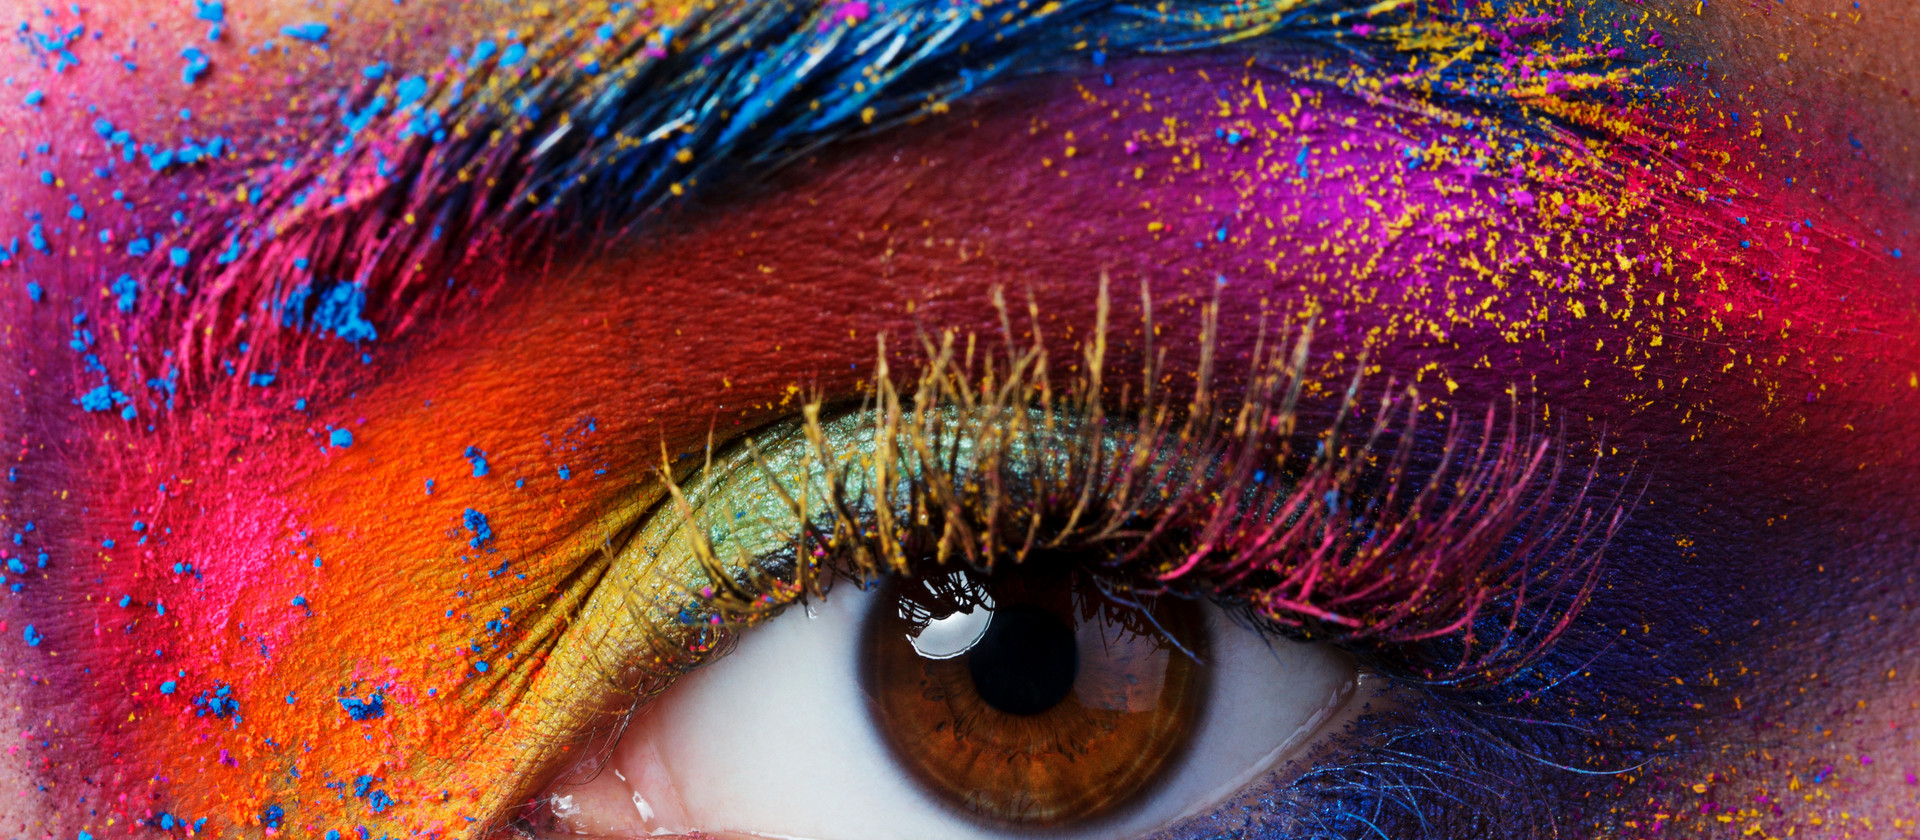 Close up view of female eye with bright multicolored fashion mak